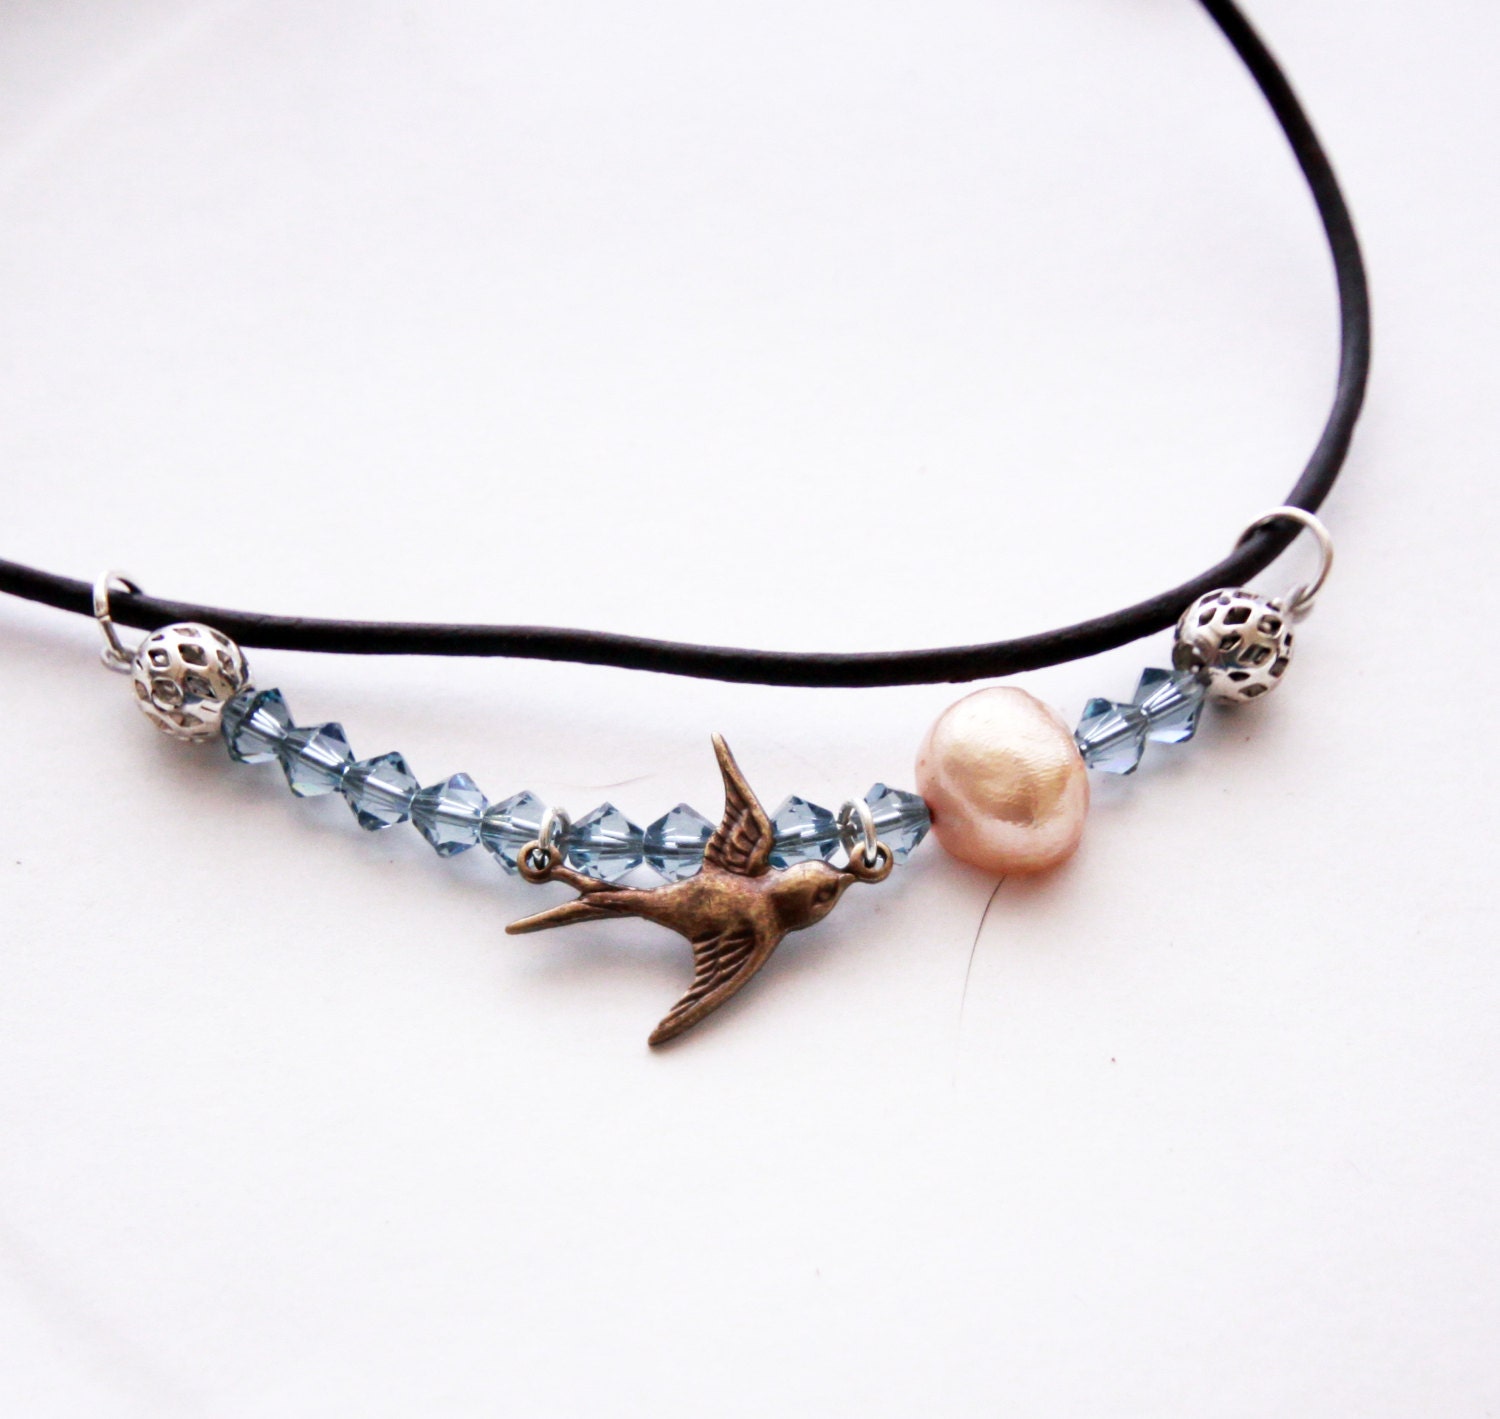 Bird Necklace * Copper Swallow Necklace * Blue Swarovki Crystal * Pearl * Leather * Nature Jewelry * Hiker's Gift * Flew the Coop - ScrapsandPaper